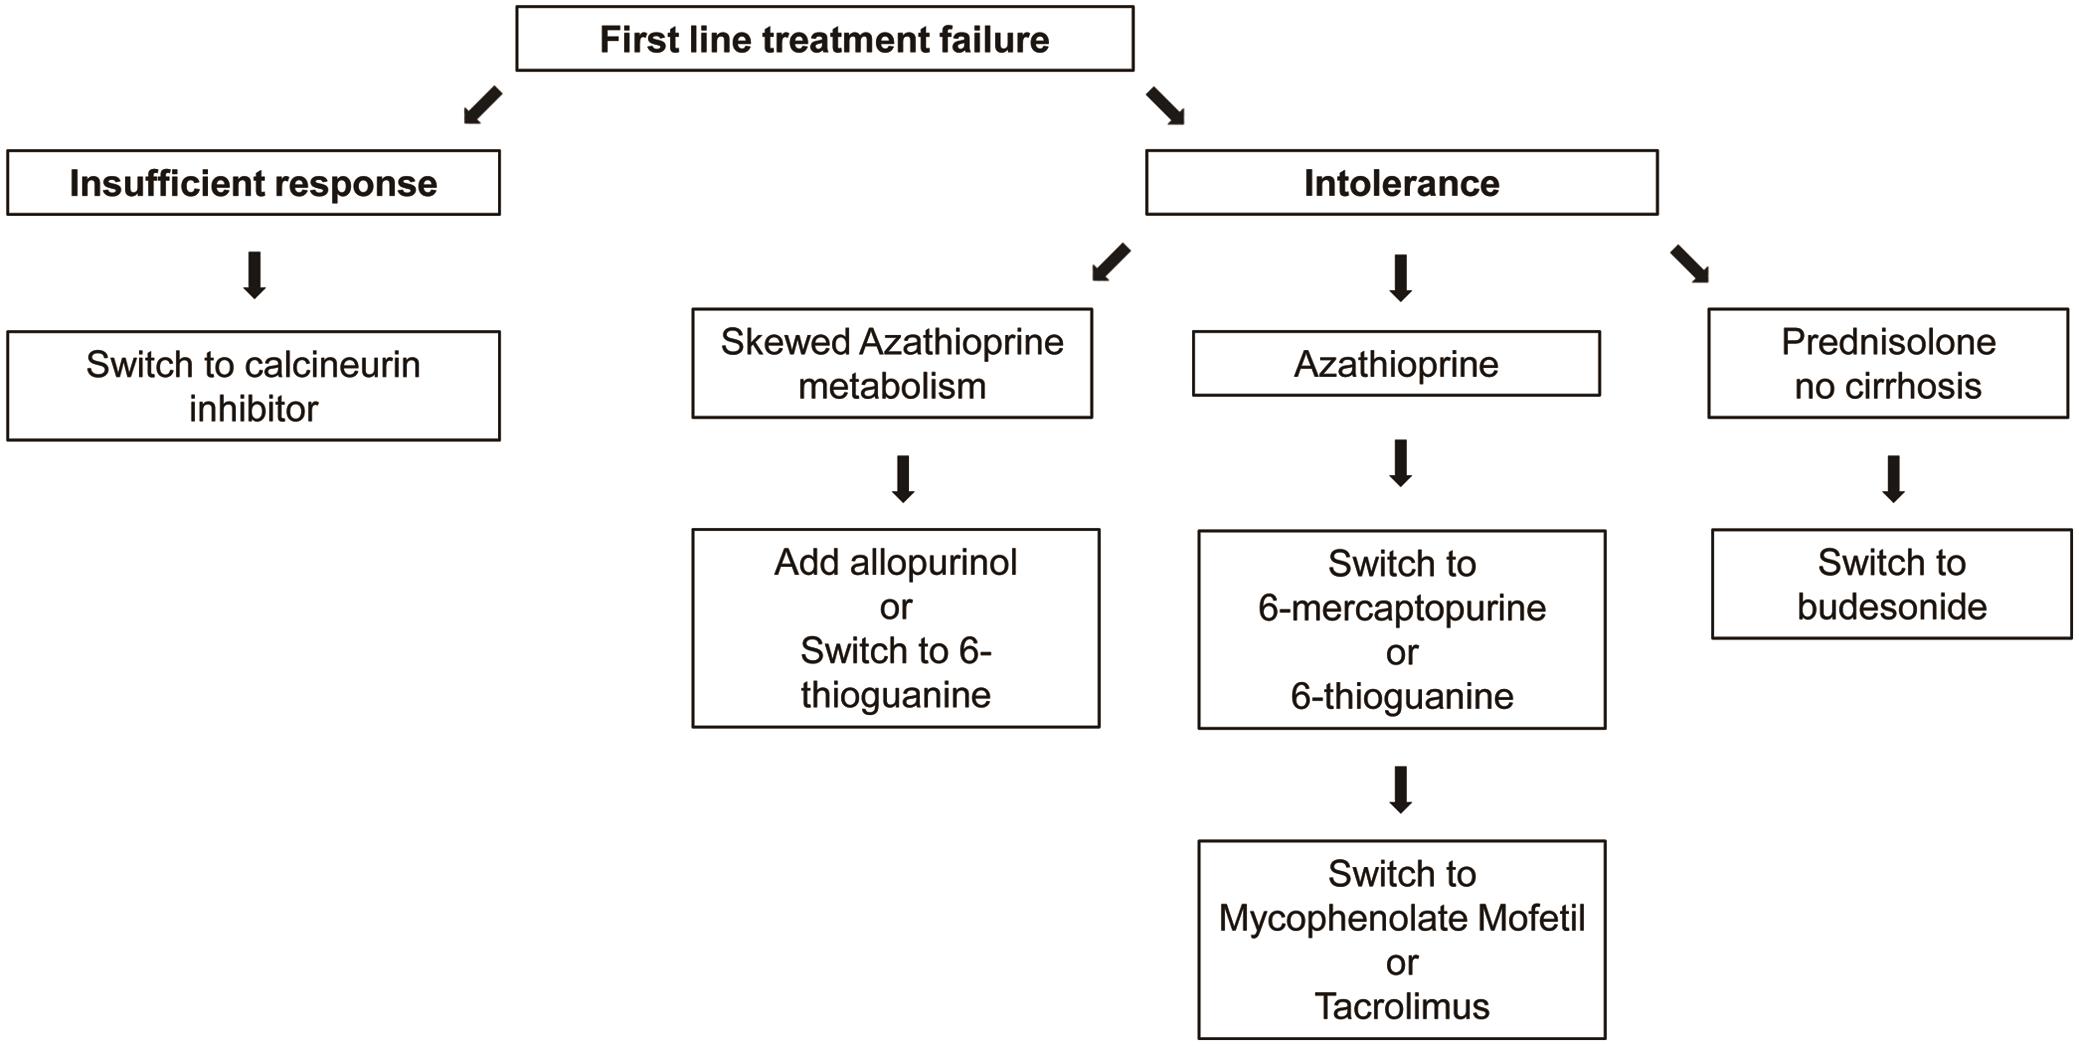 Treatment options after first-line treatment failure.